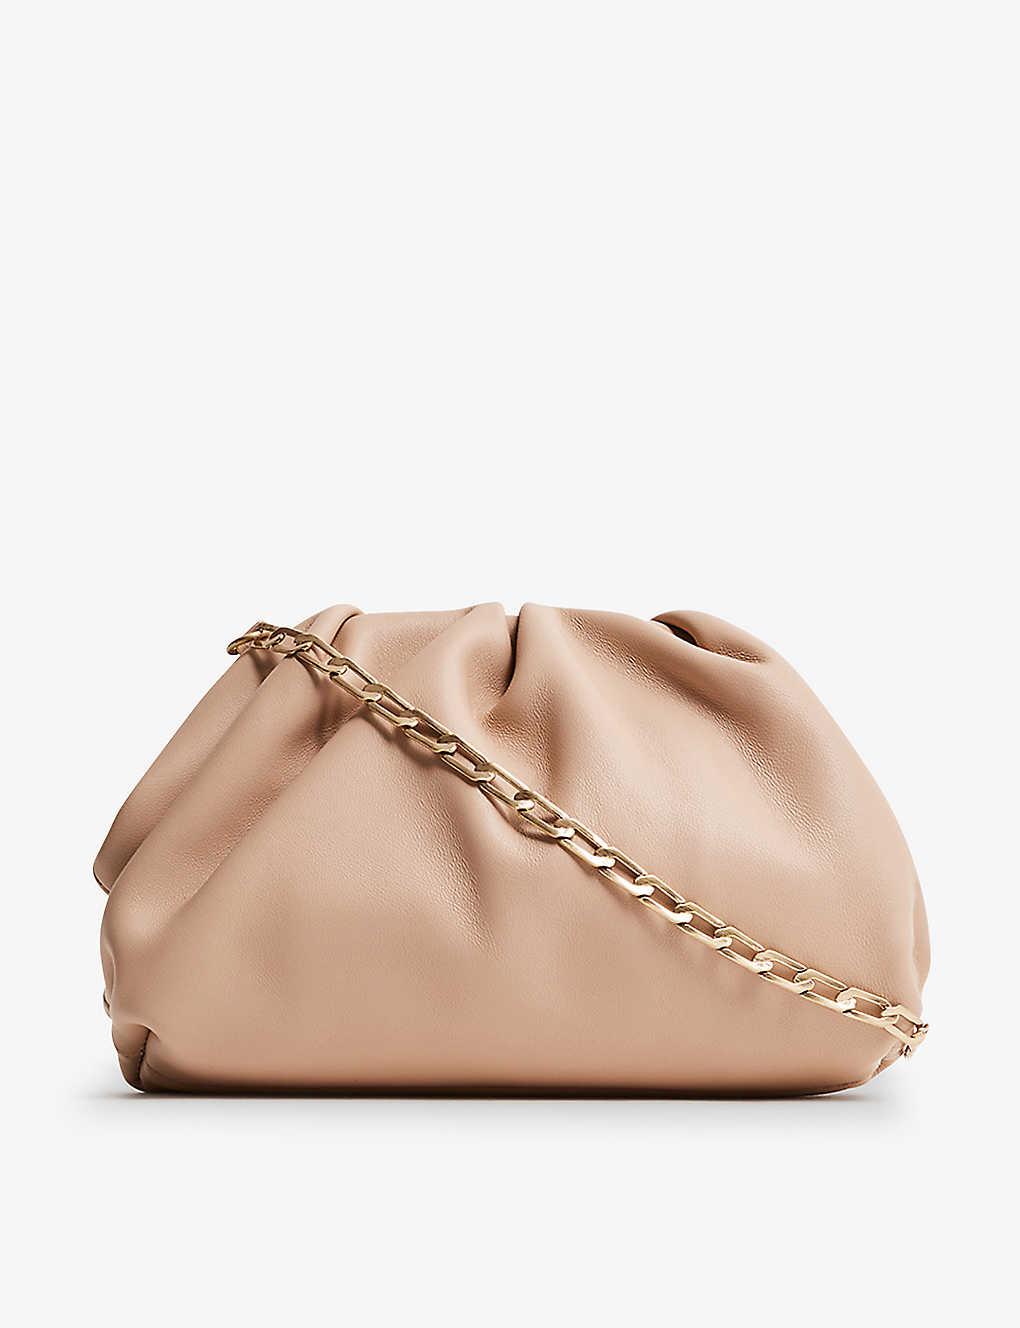 Reiss Elsa Chain-strap Nappa-leather Clutch Bag in Natural | Lyst Canada